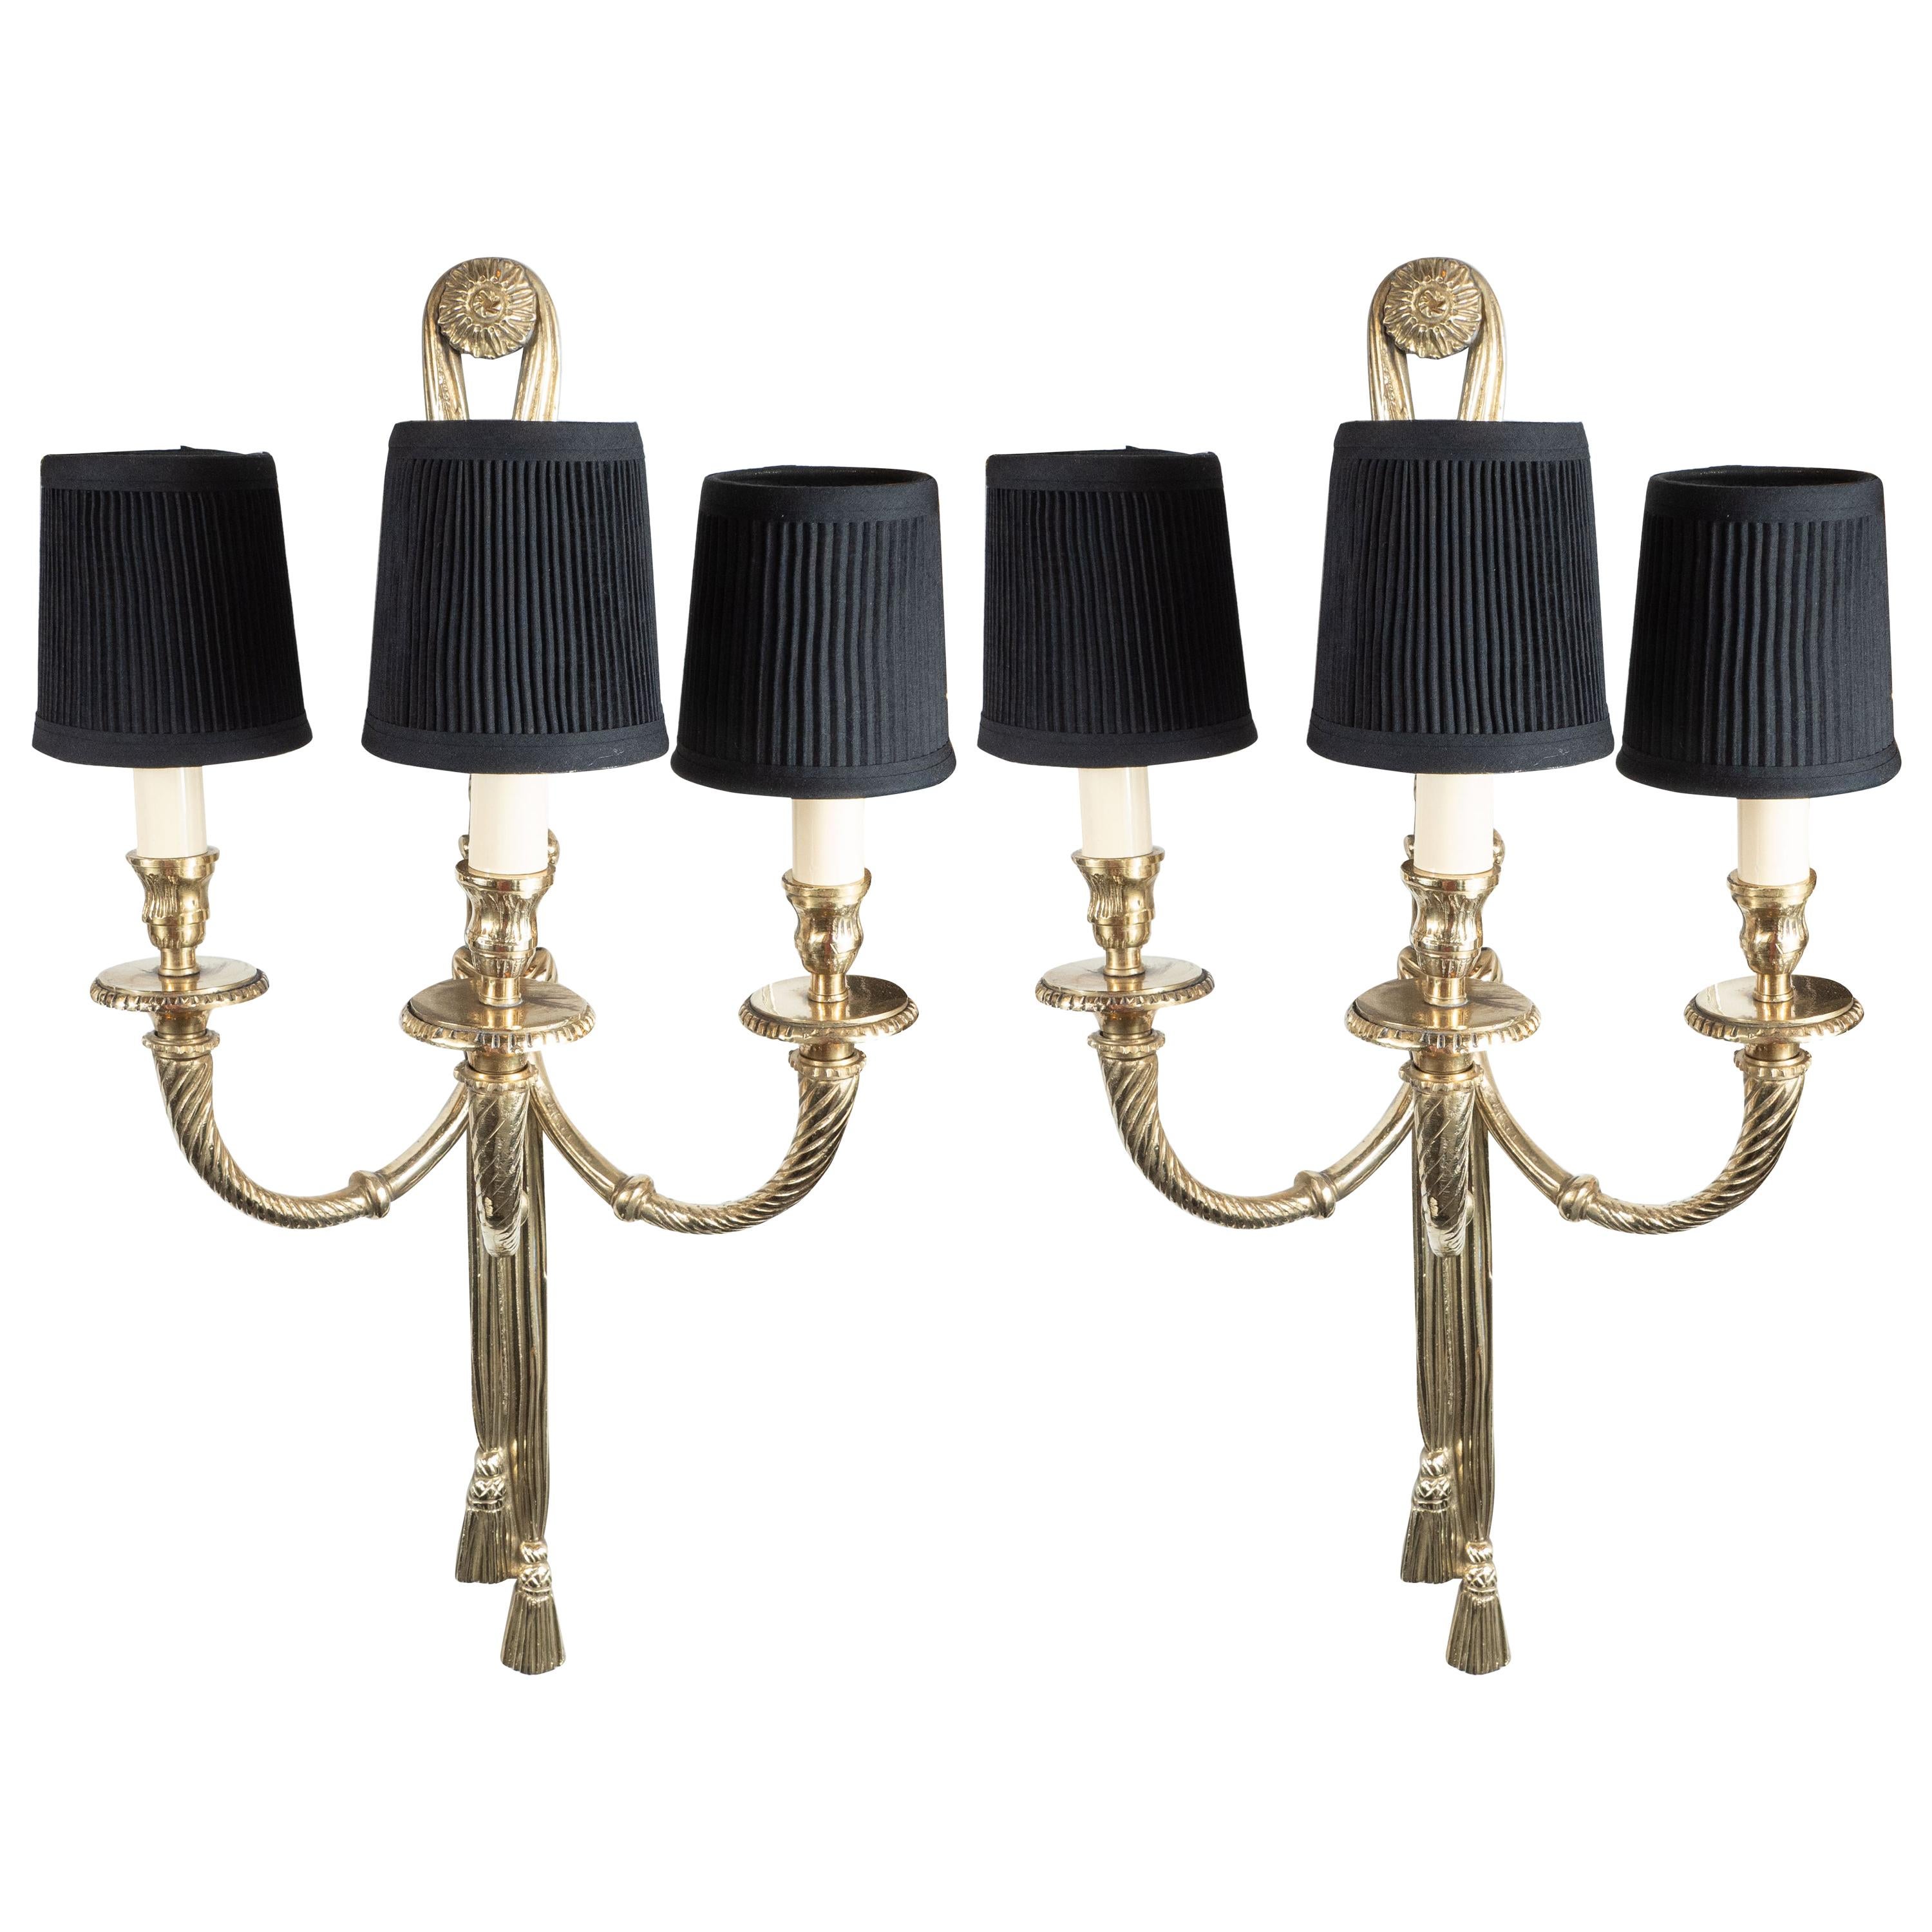 Pair of Mid-Century Modern Silvered Bronze Sconces with Neoclassical Detailing